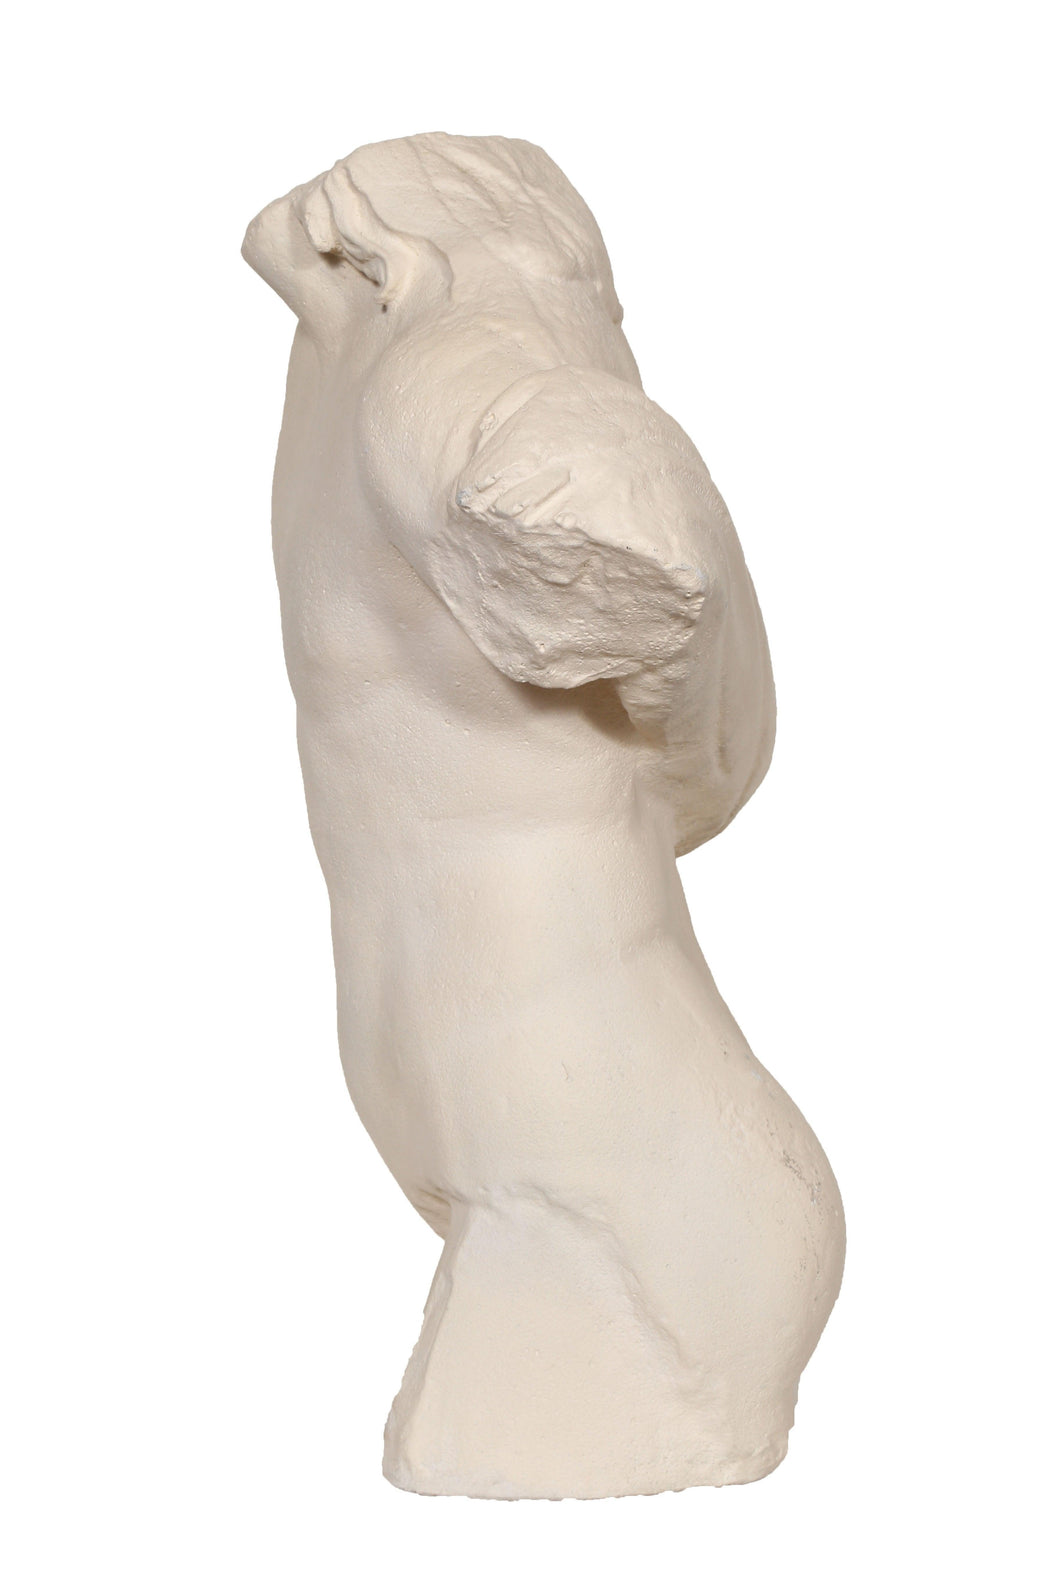 Torso of a Man Ceramic | Unknown Artist,{{product.type}}